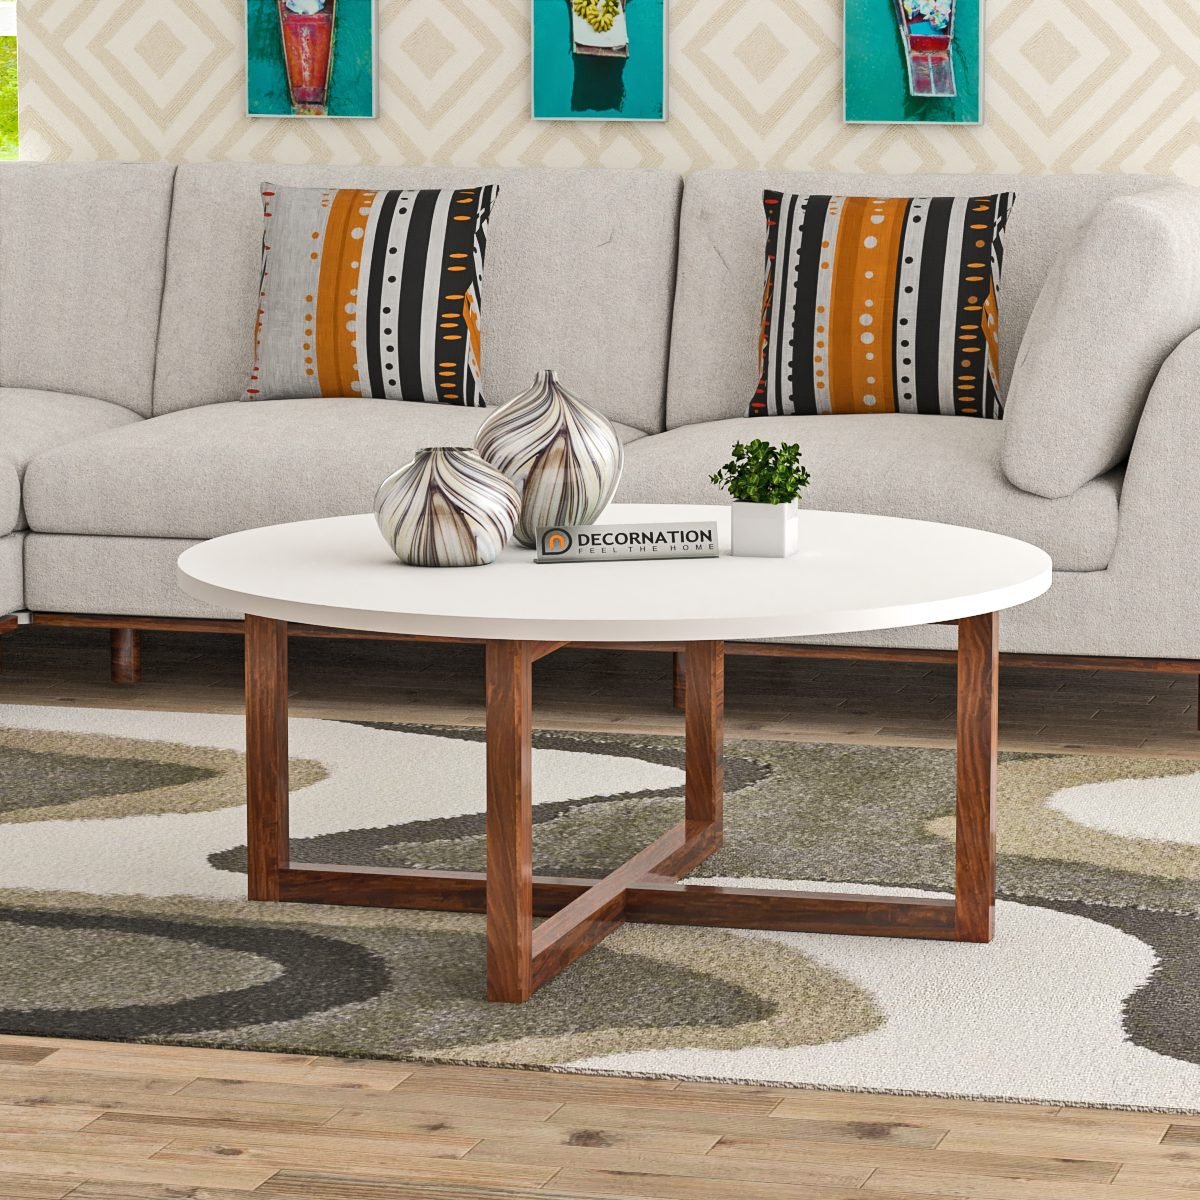 Plymouth Circular Top Wooden Coffee Table – White